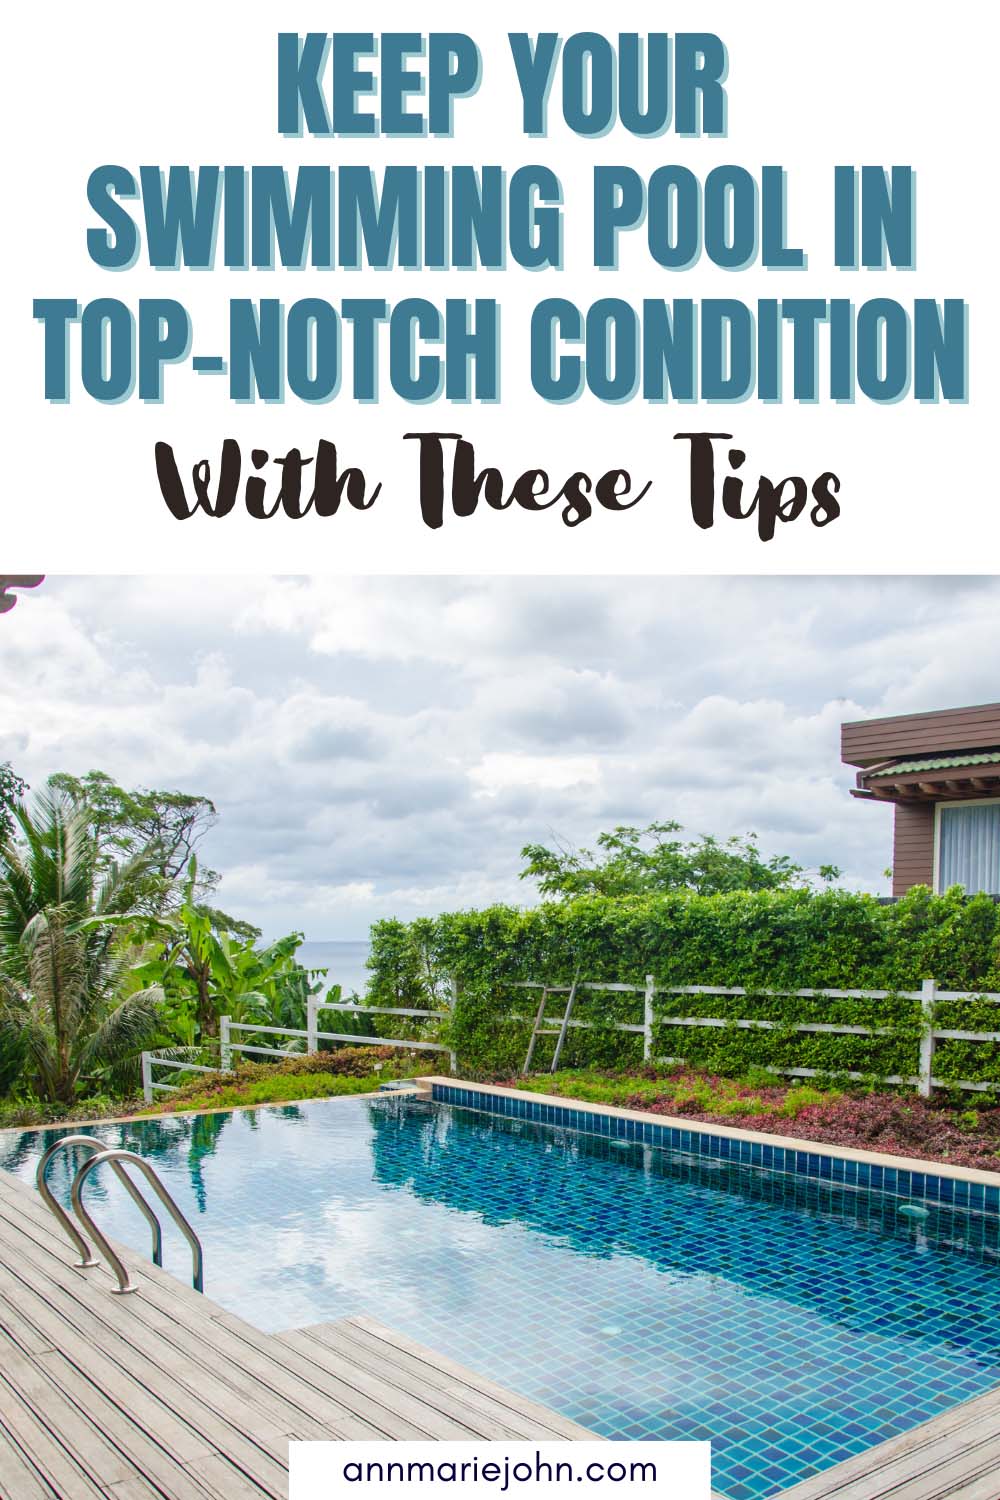 Keep Your Swimming Pool in Top-Notch Condition With These Tips